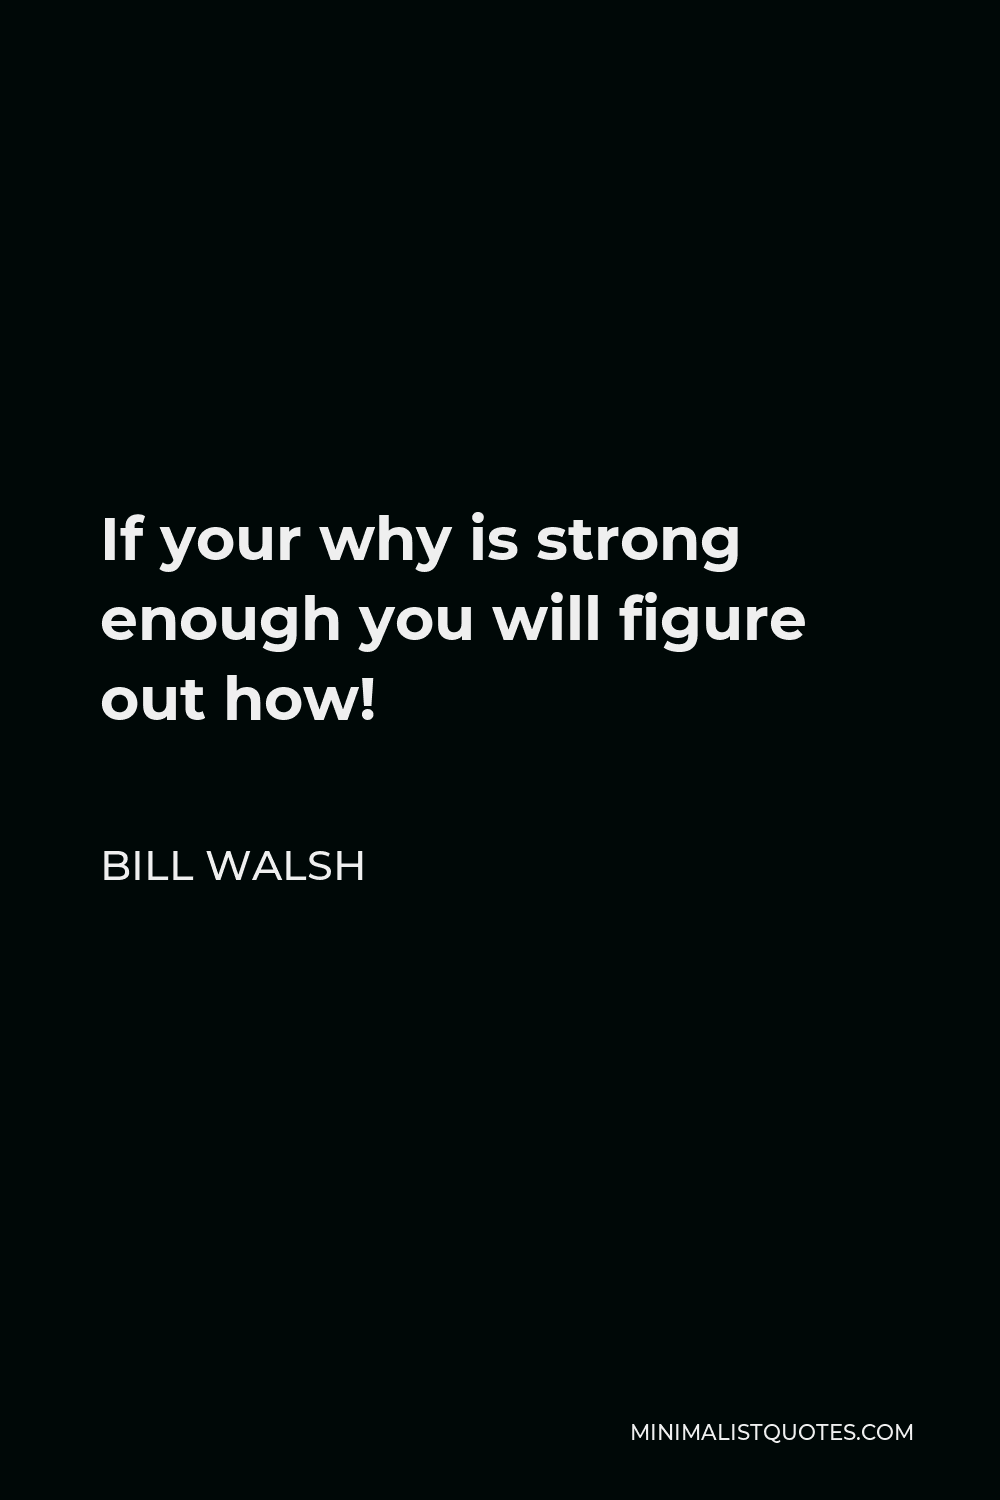 Bill Walsh Quote - If your why is strong enough you will figure out how!